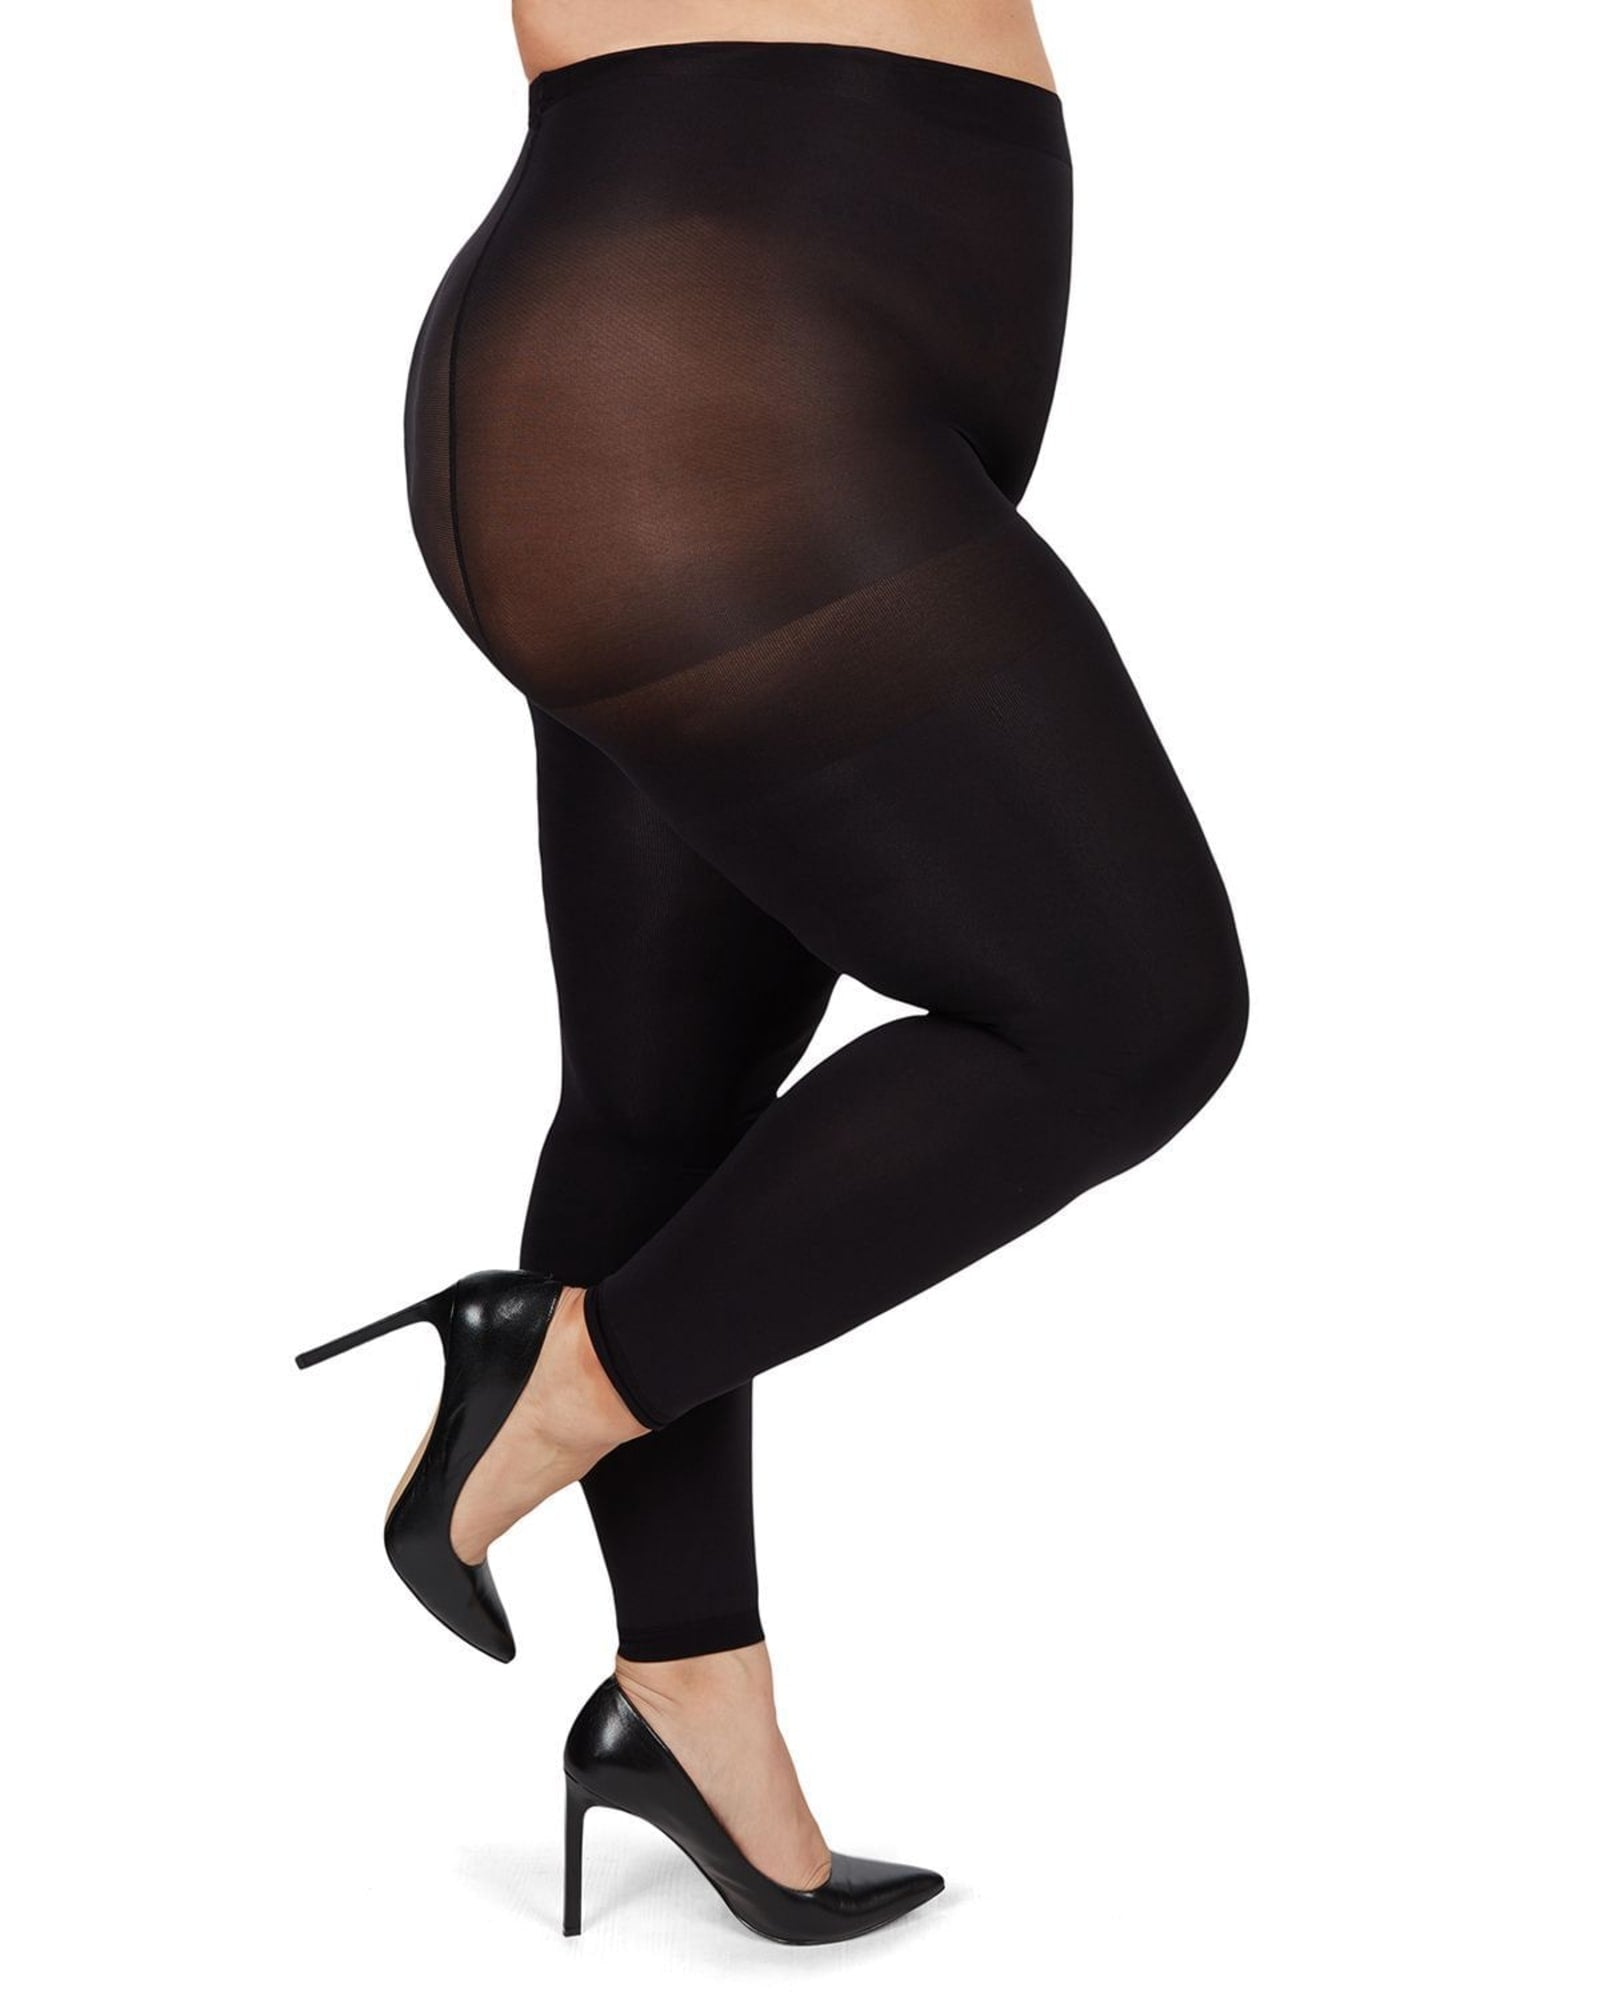 Plus Size Curvy Super Matte Control Top Footless Tights | Black